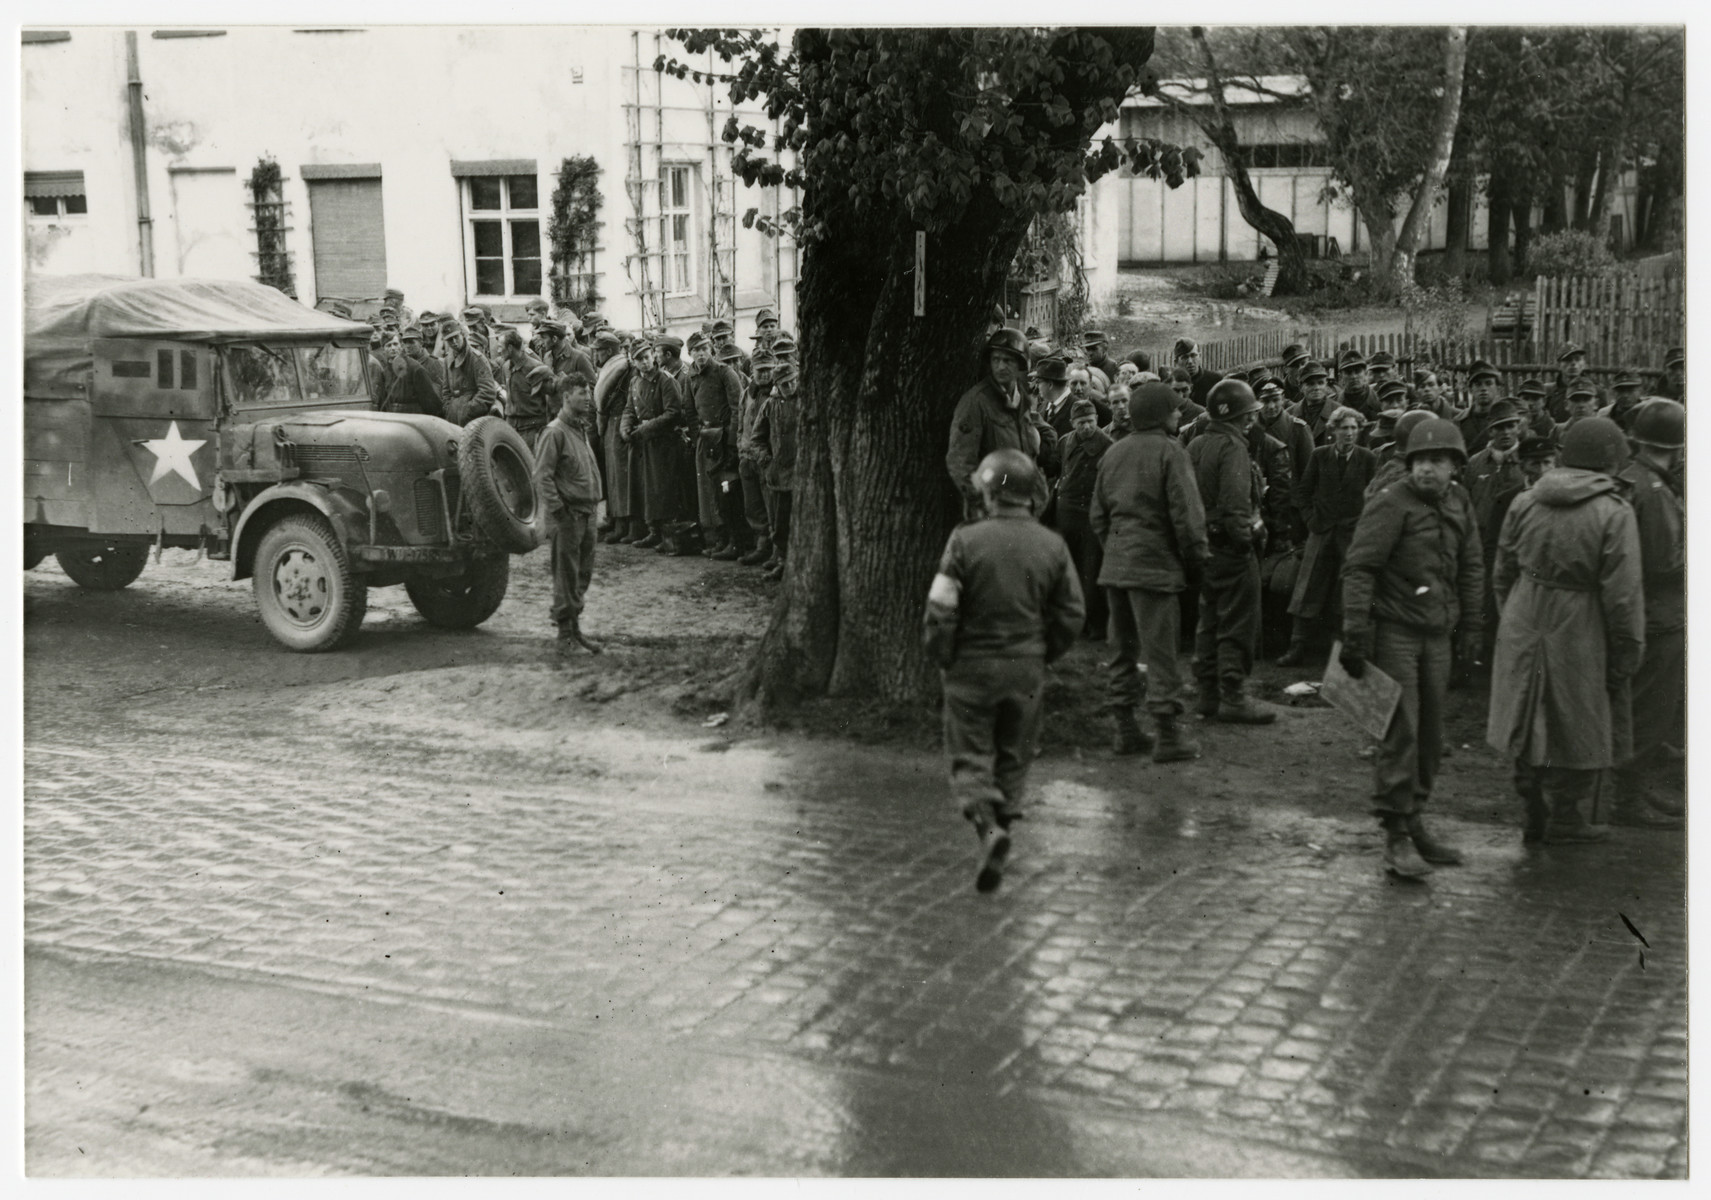 American soldiers stand guard over recently captured German prisoners.

The original caption reads" Munich 1945 -- We don't know what to do with all the prisoners."